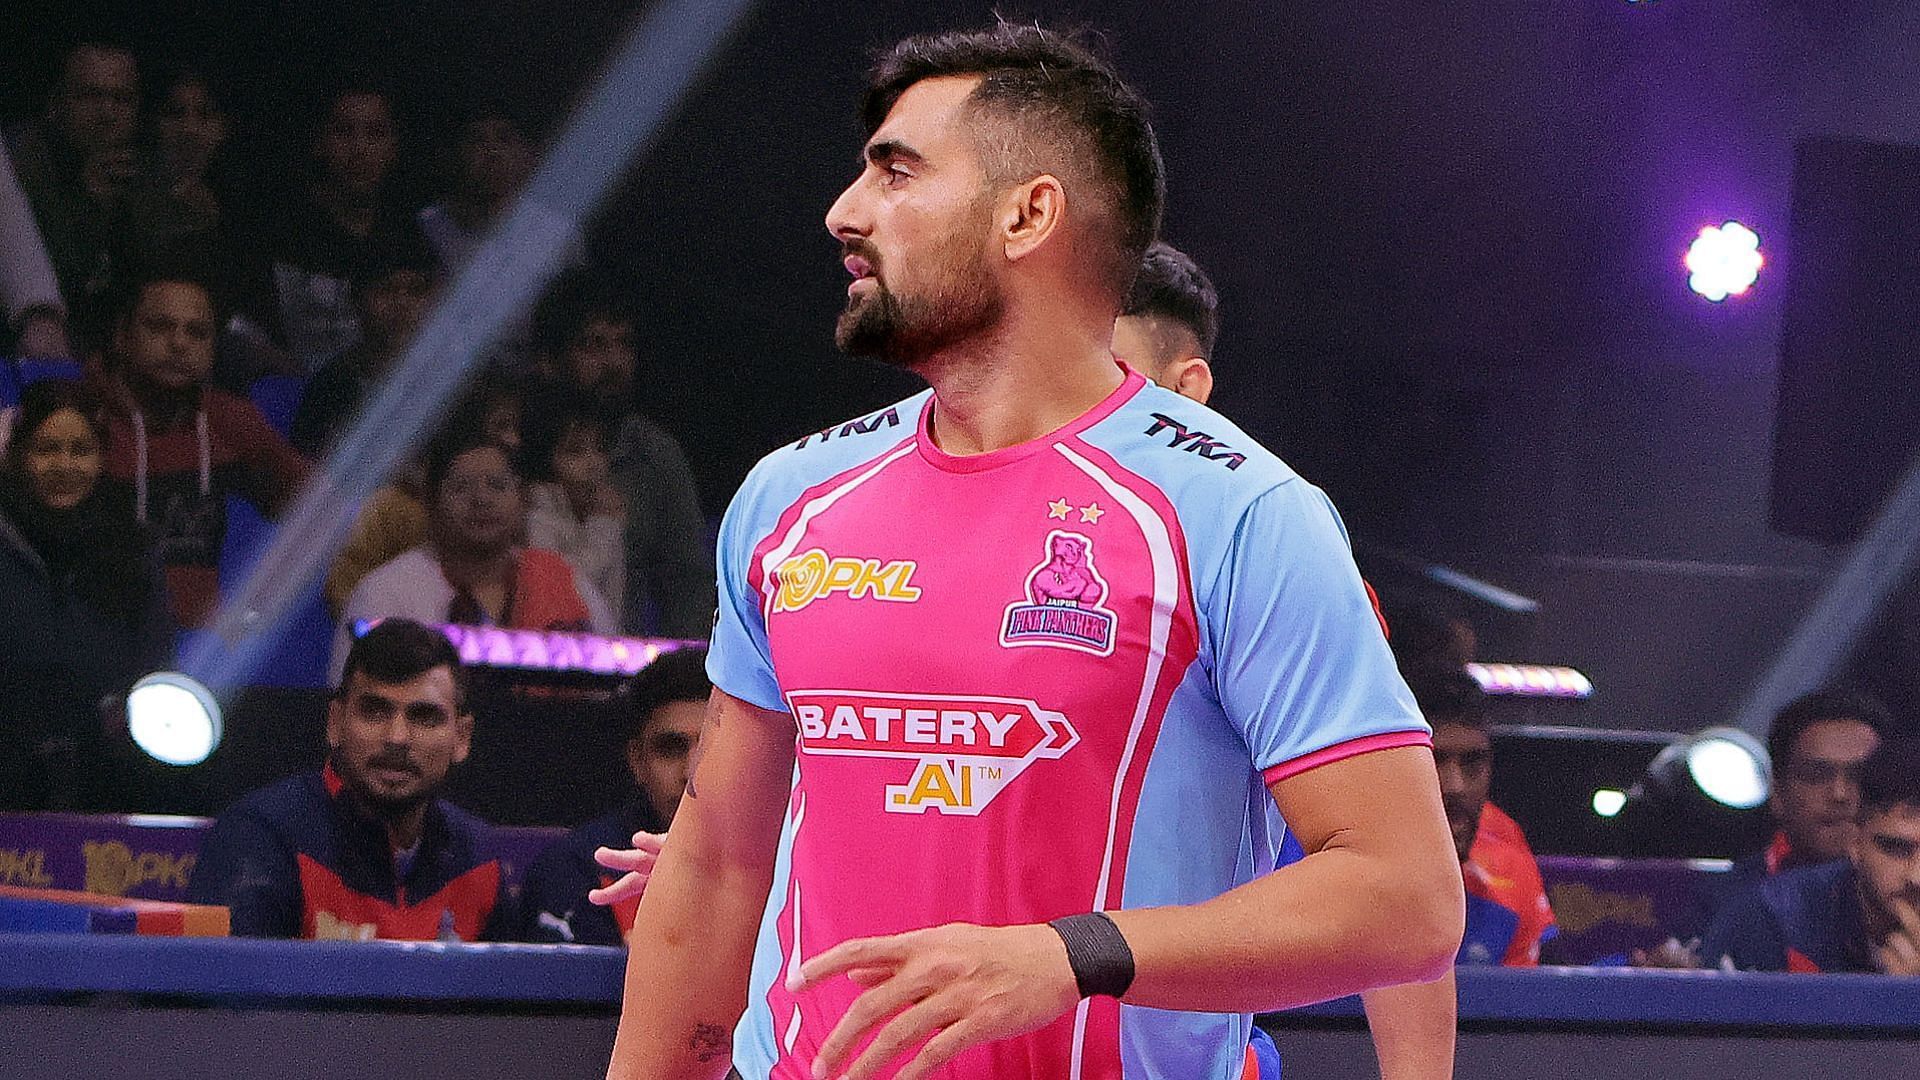 Rahul Chaudhary is playing for Jaipur Pink Panthers in IPL